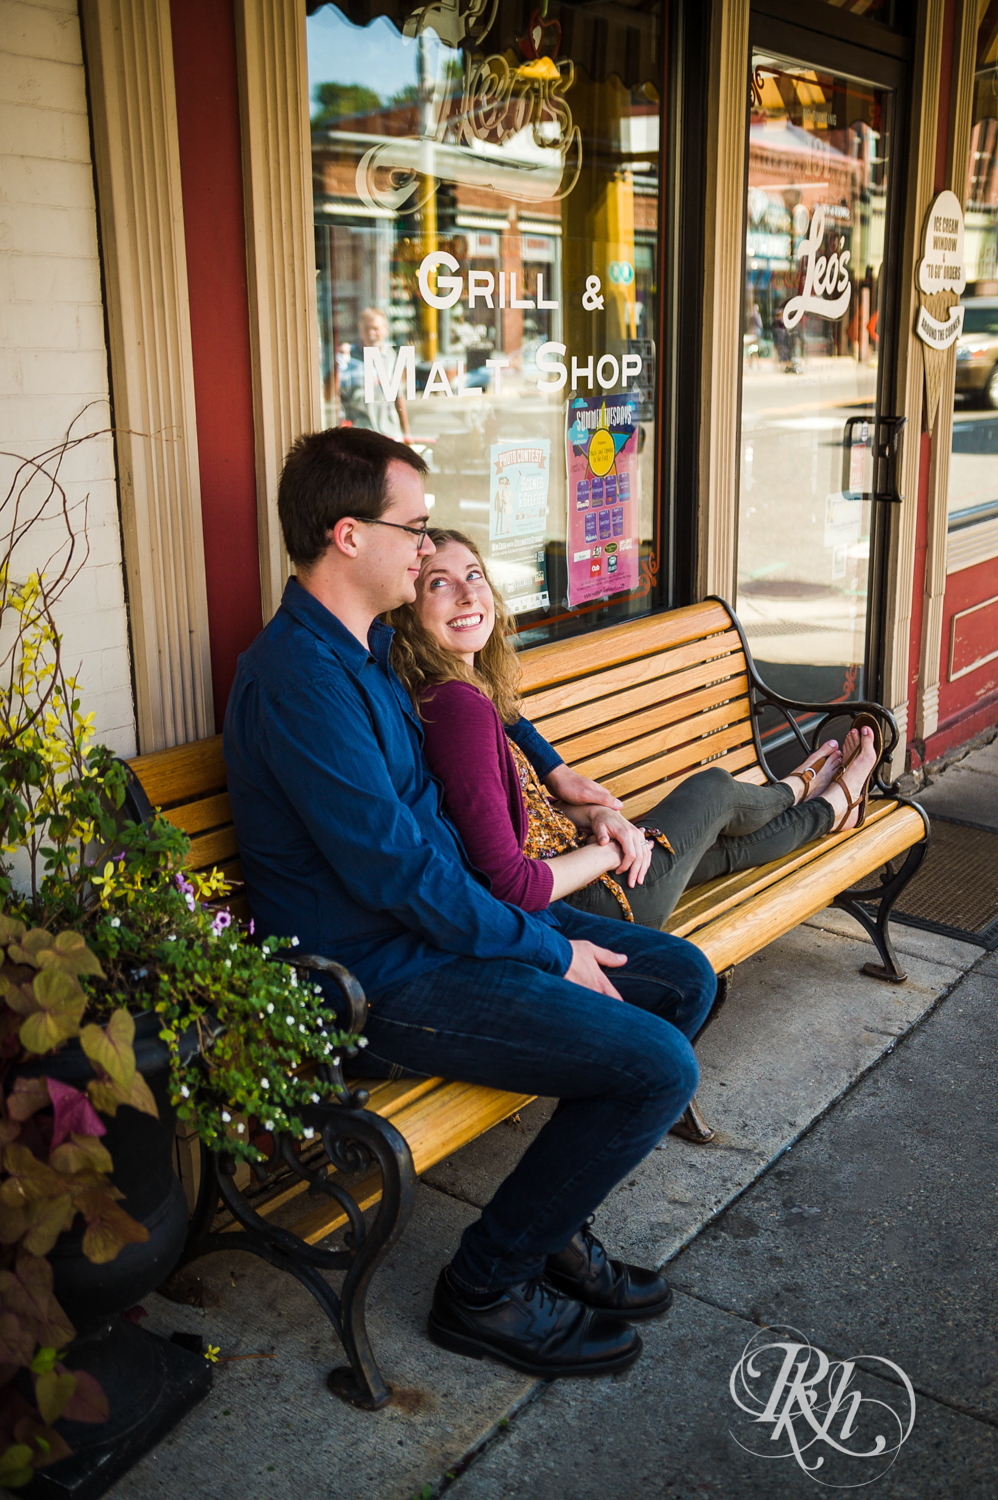 Man and woman smile on a bench in Stillwater, Minnesota.